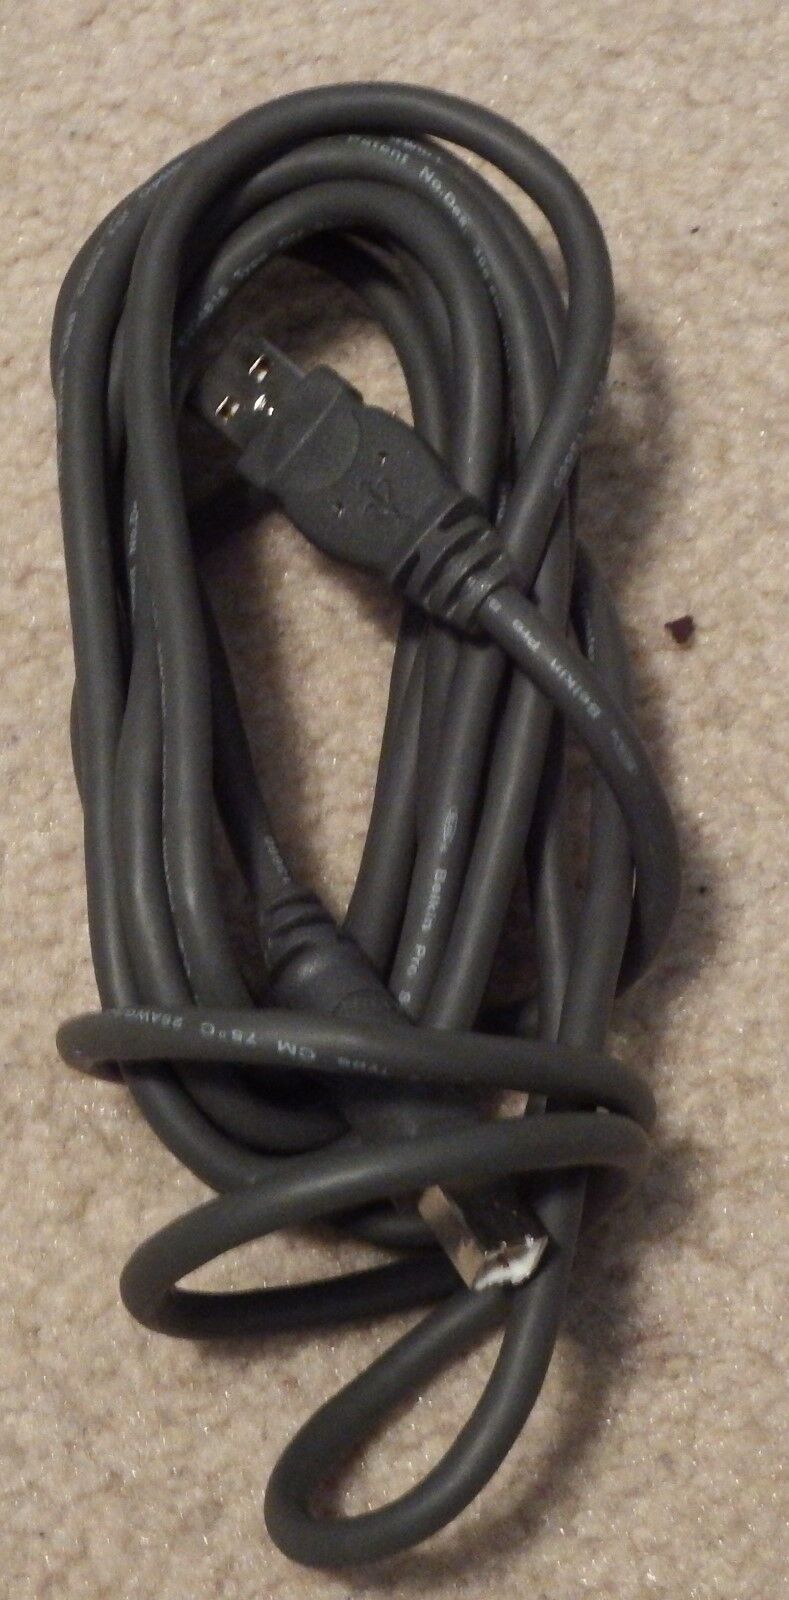  BELKIN PRO SERIES 10 FOOT USB  PRINTER STYLE CABLE FT4 13660  GREAT CONDITION 